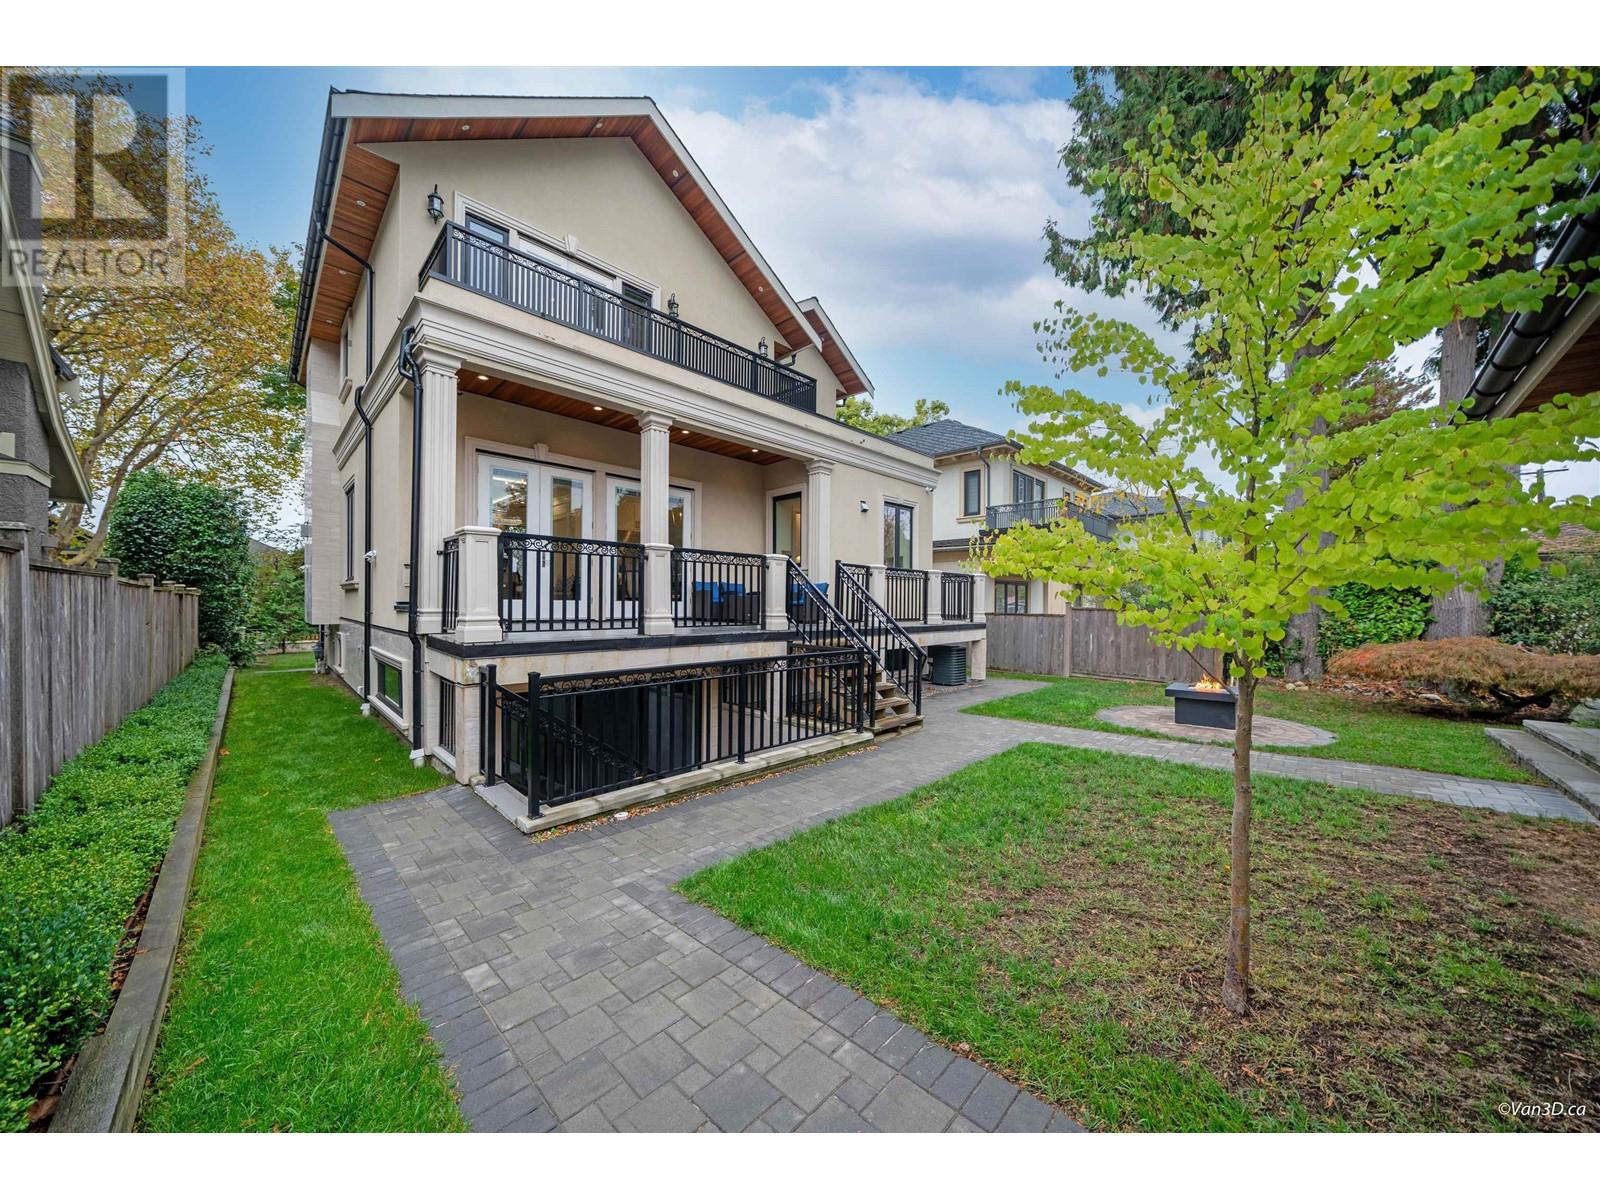 Listing Picture 36 of 38 : 3725 W 26TH AVENUE, Vancouver / 溫哥華 - 魯藝地產 Yvonne Lu Group - MLS Medallion Club Member